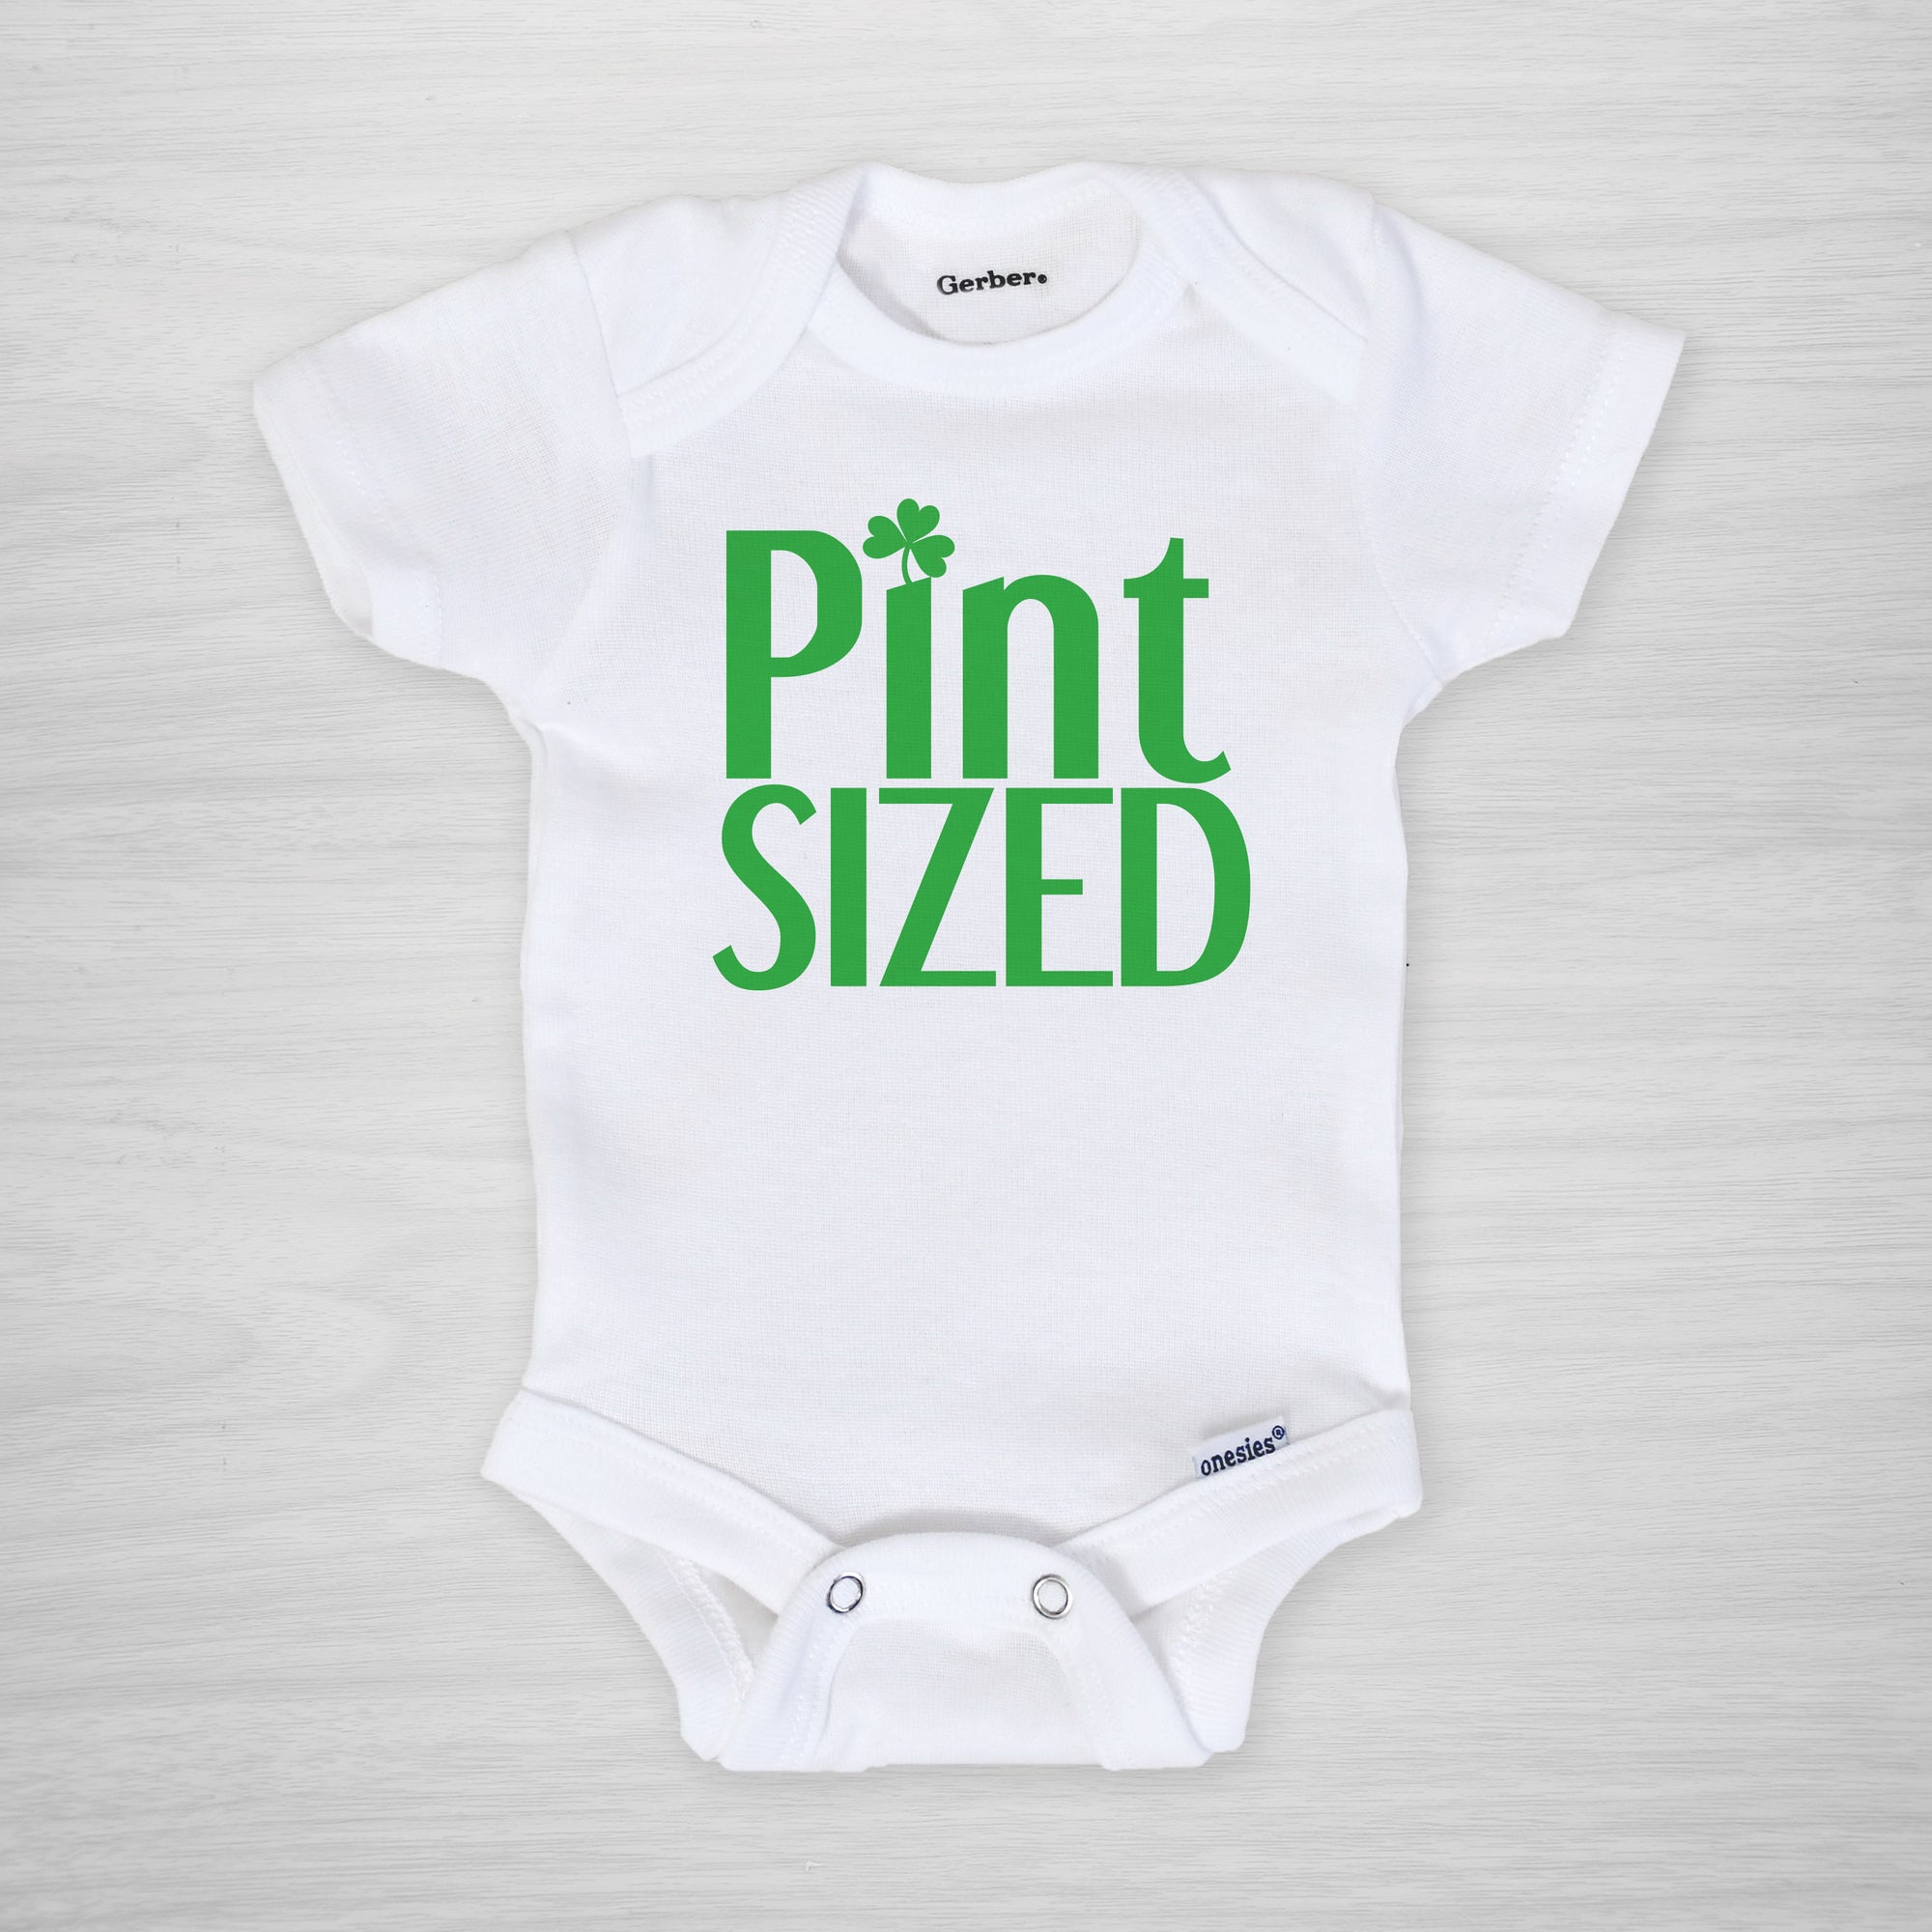 Pint Sized St. Patrick's Day Onesie®, Printed with super soft eco safe inks, Long sleeved